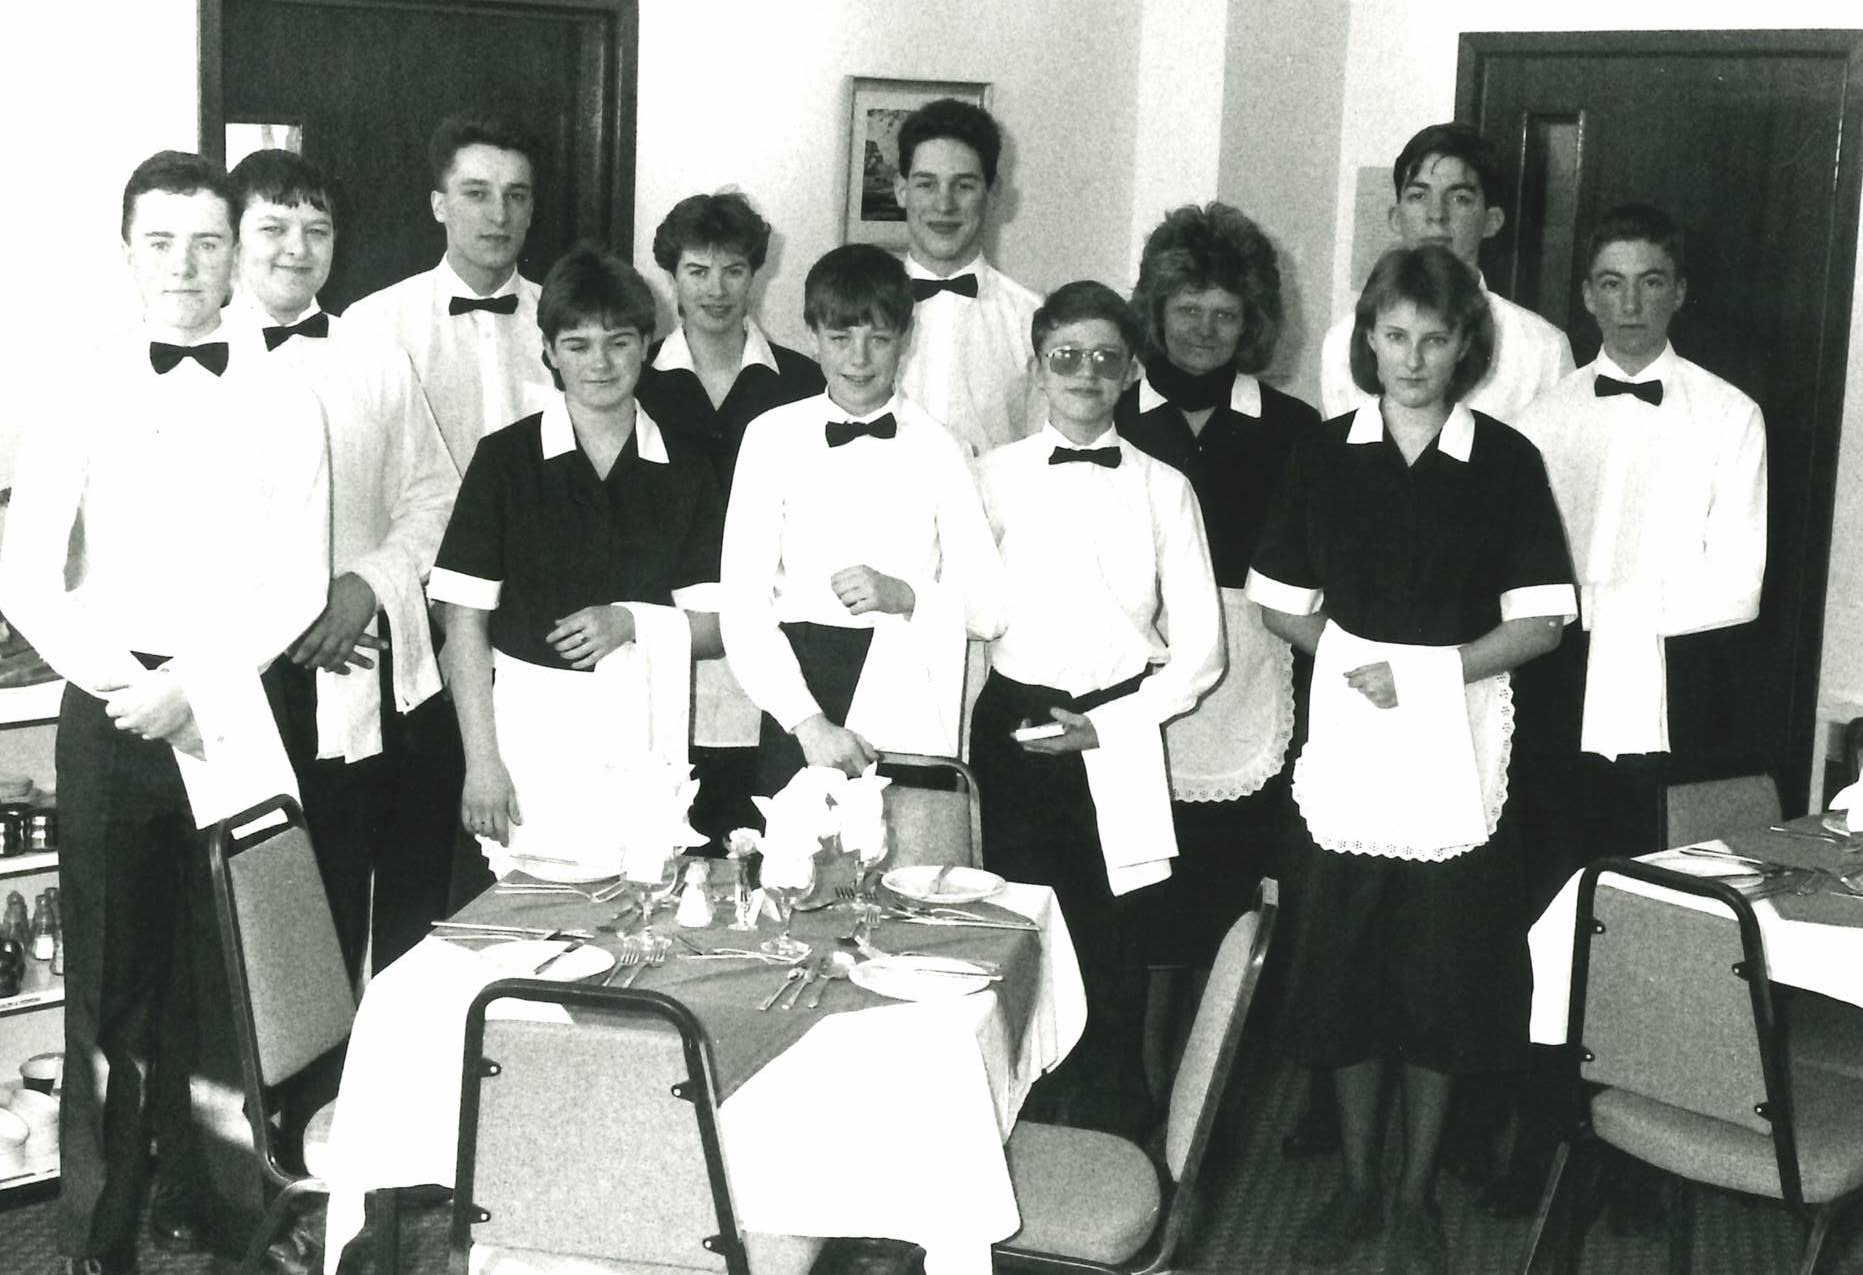 Old photo showing a group of catering students standing in the college restaurant